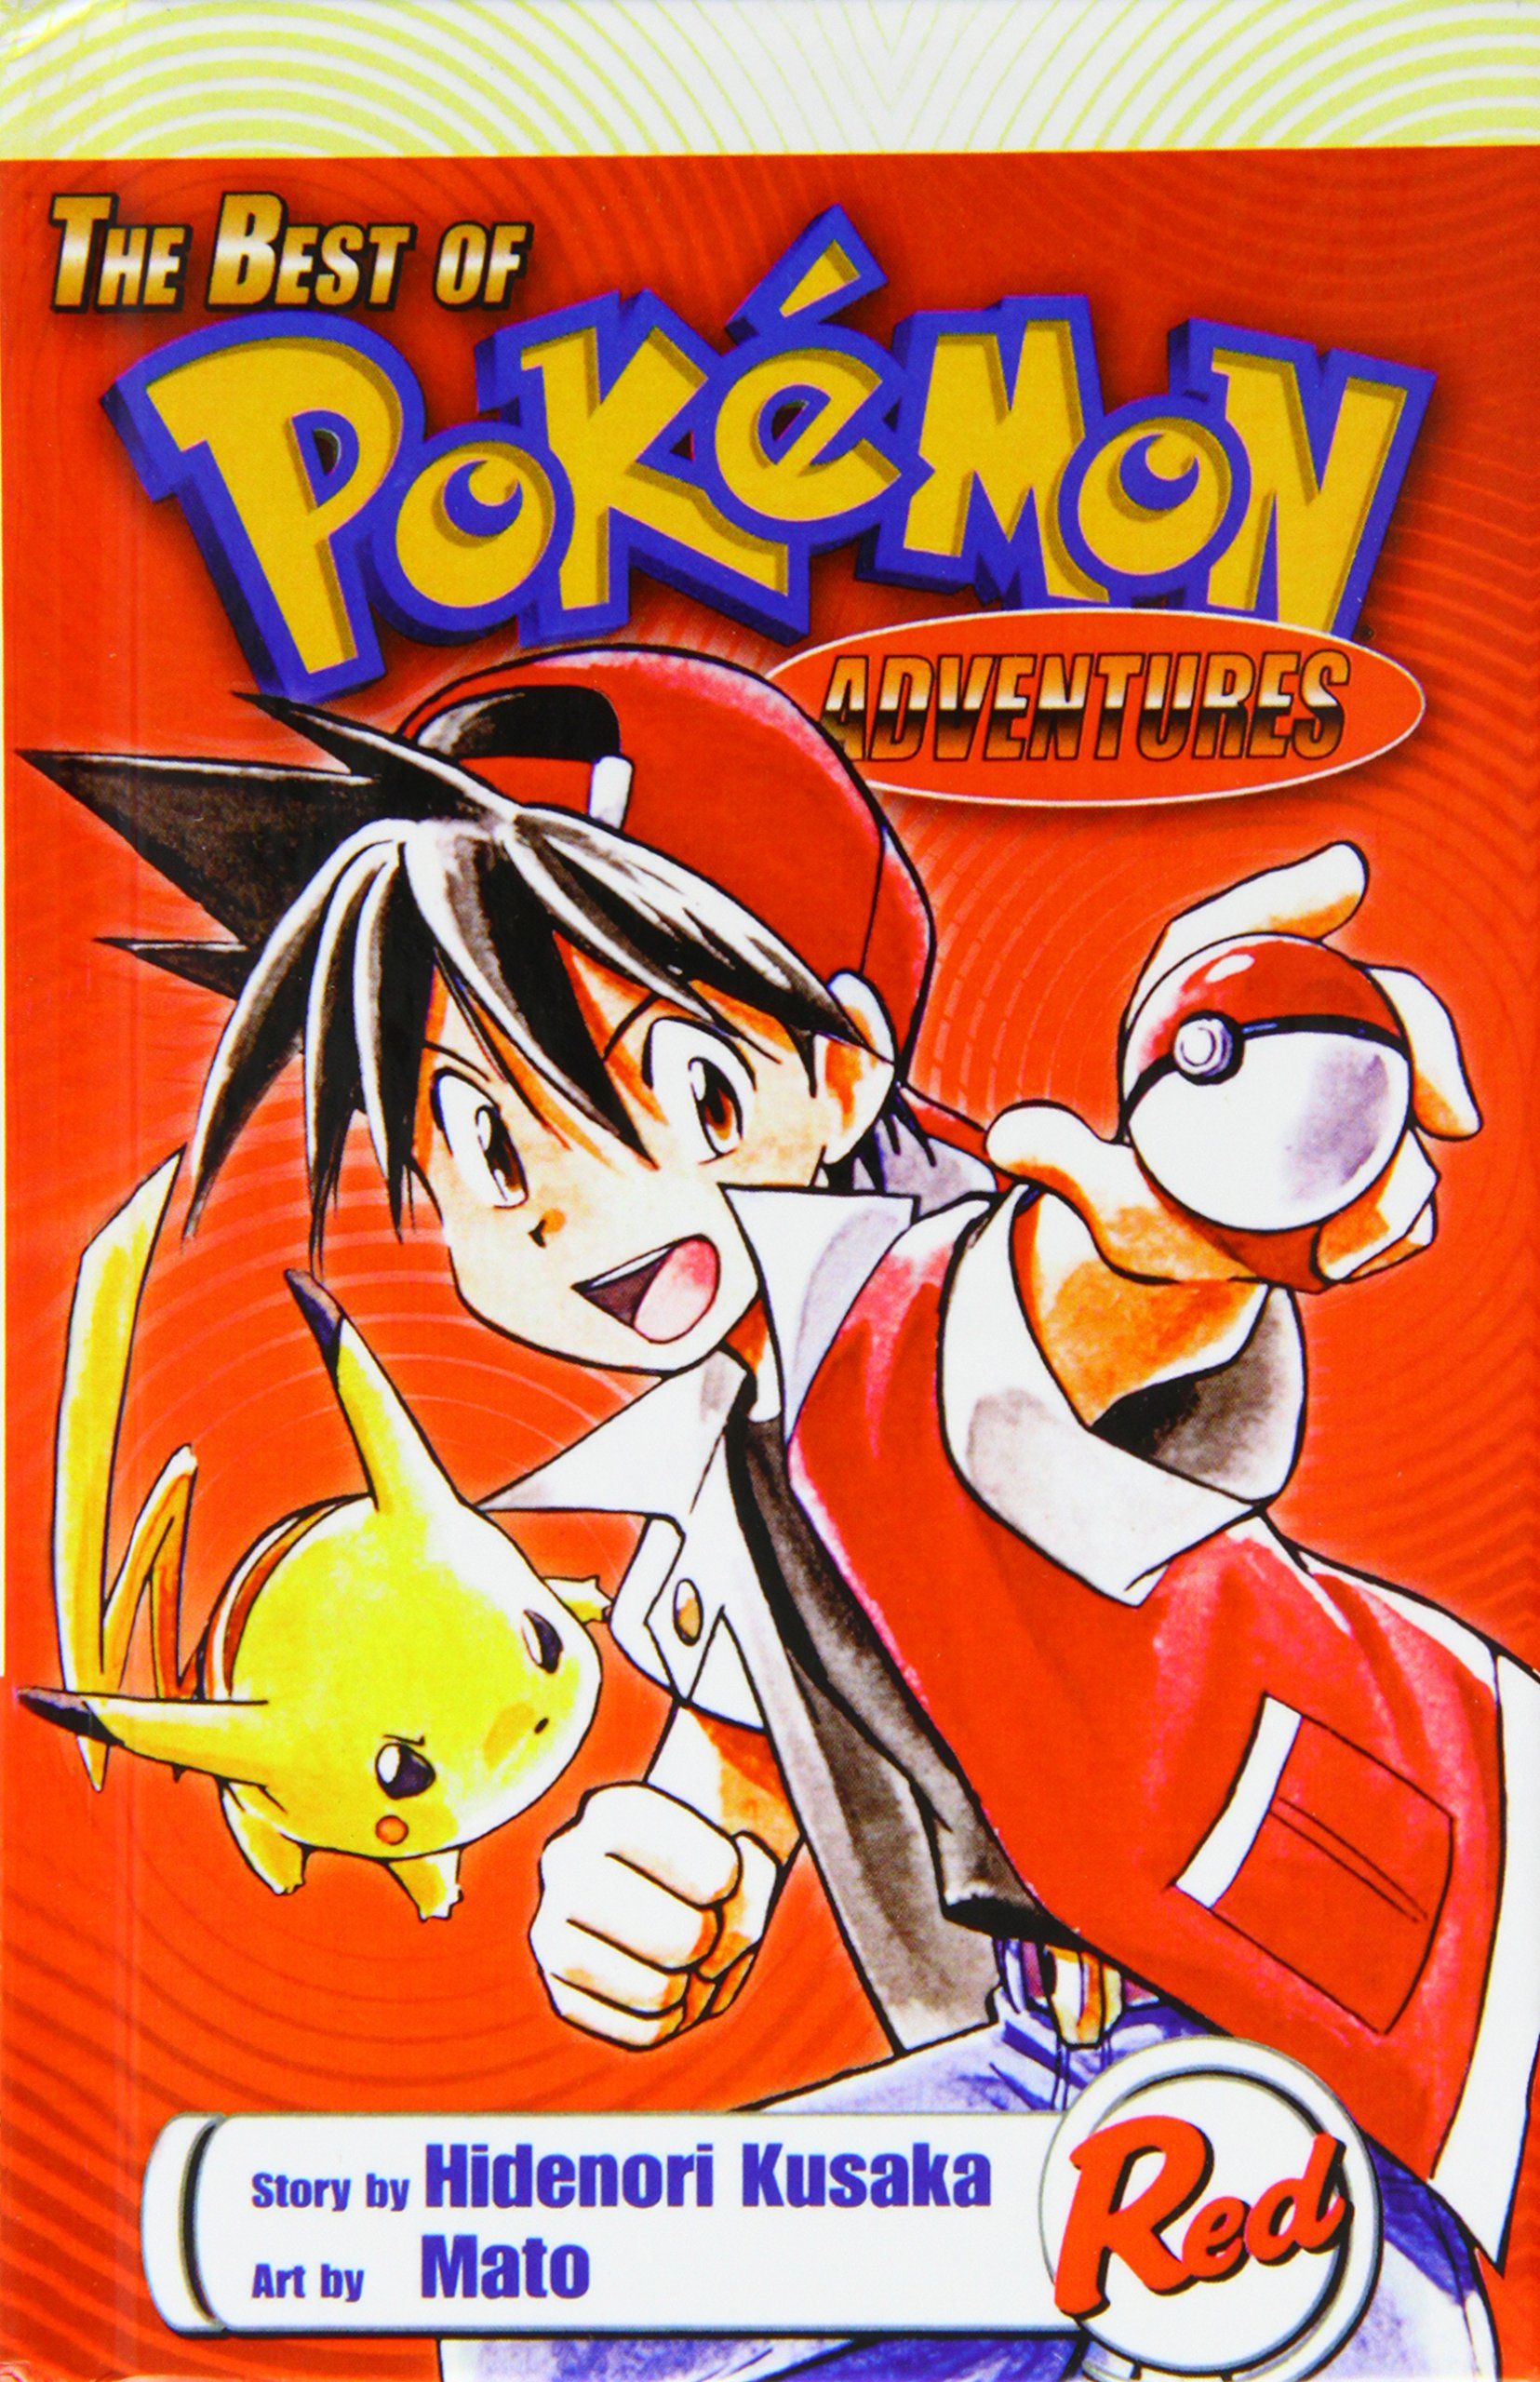 Pokémon Adventures (Red and Blue), Vol. 1, Book by Hidenori Kusaka, Mato, Official Publisher Page